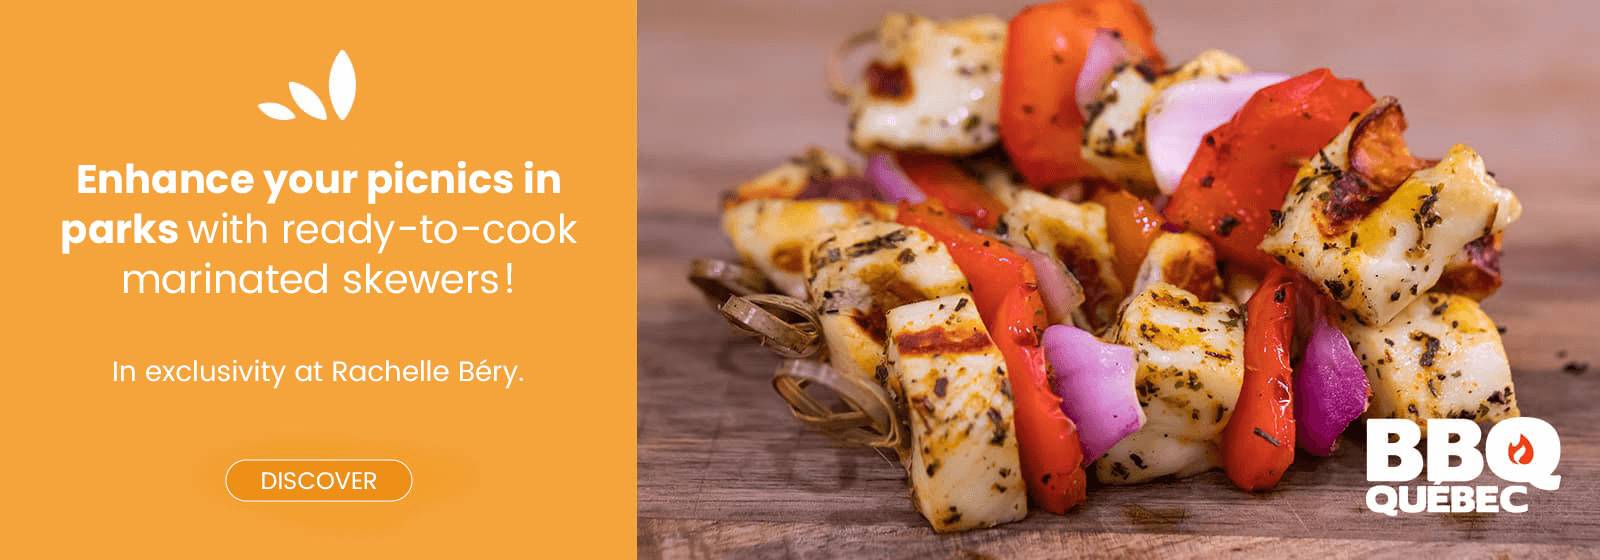 Text Reading 'Enhance your picnics in parks with ready-to-cook marinated skewers! In exclusivity at Rachelle Béry. Press 'Discover' button for more information'